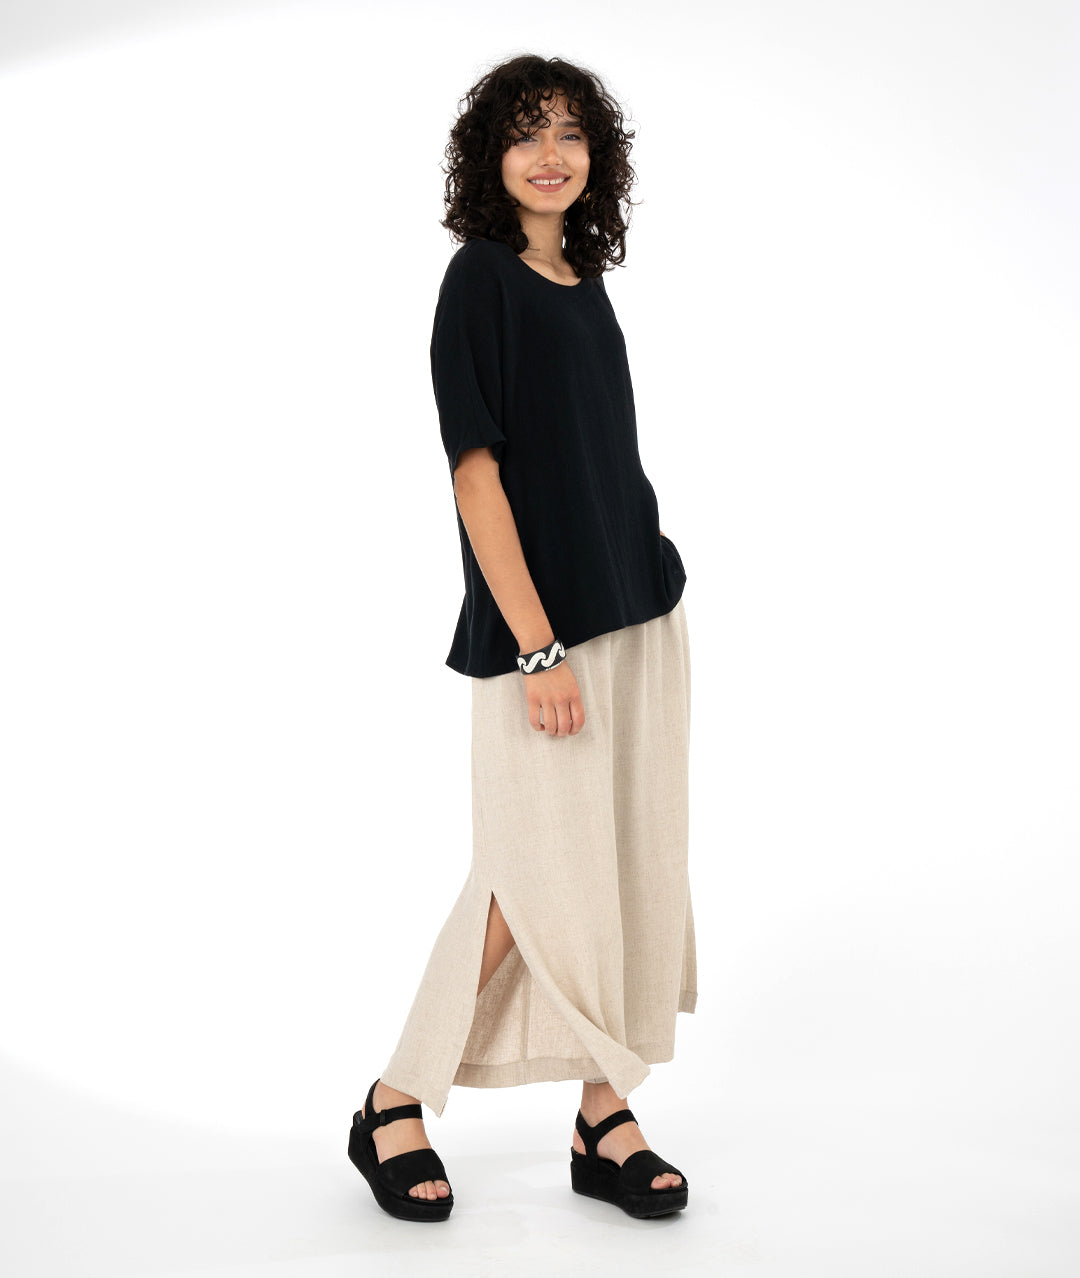 model in a wide leg oatmeal color pant with a split from hem to knee, worn with a long pullover black tee style top